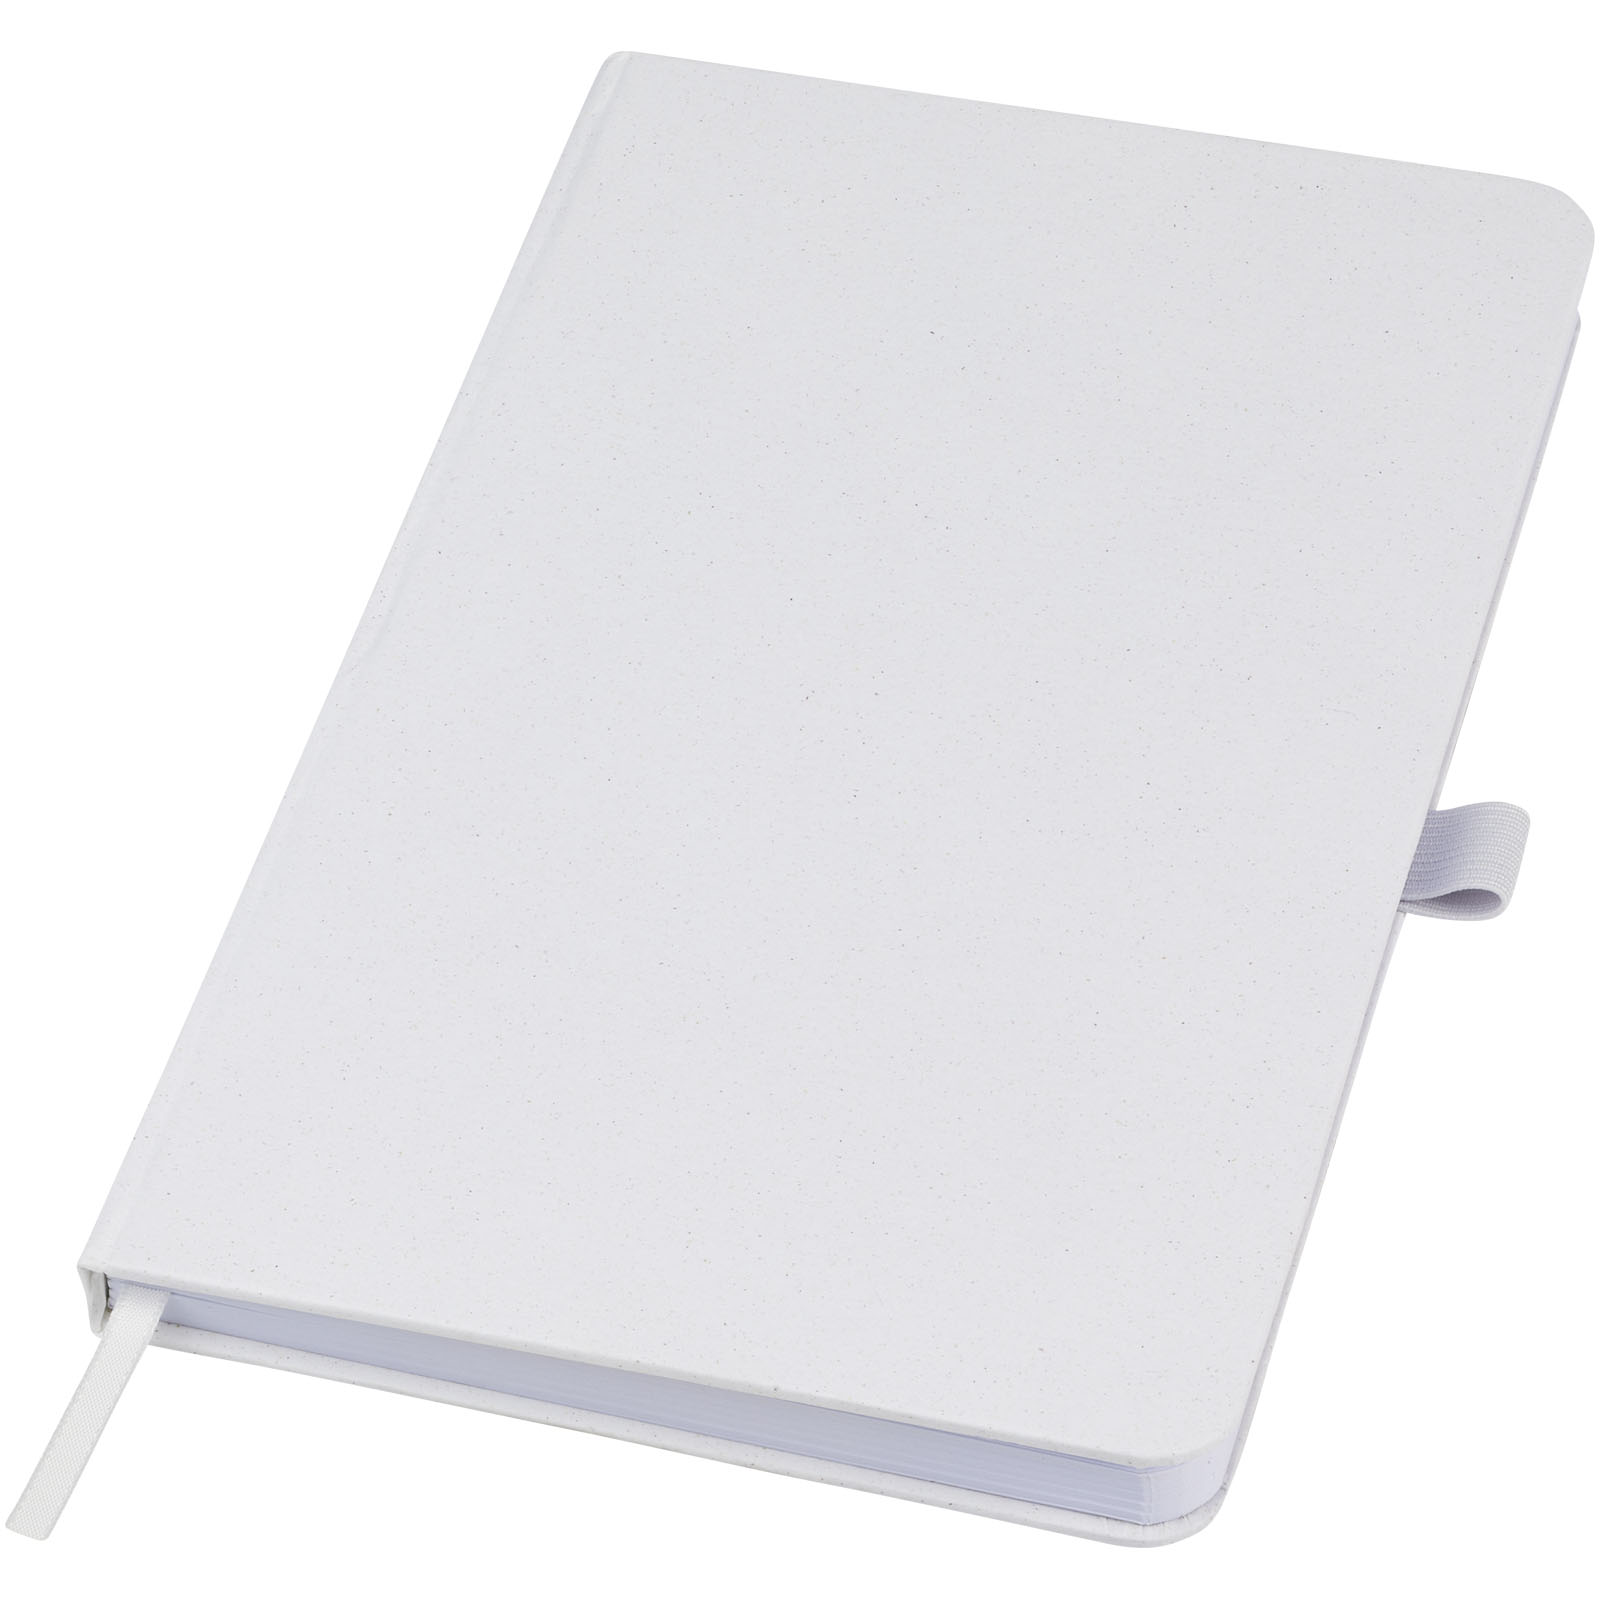 Advertising Hard cover notebooks - Fabianna crush paper hard cover notebook